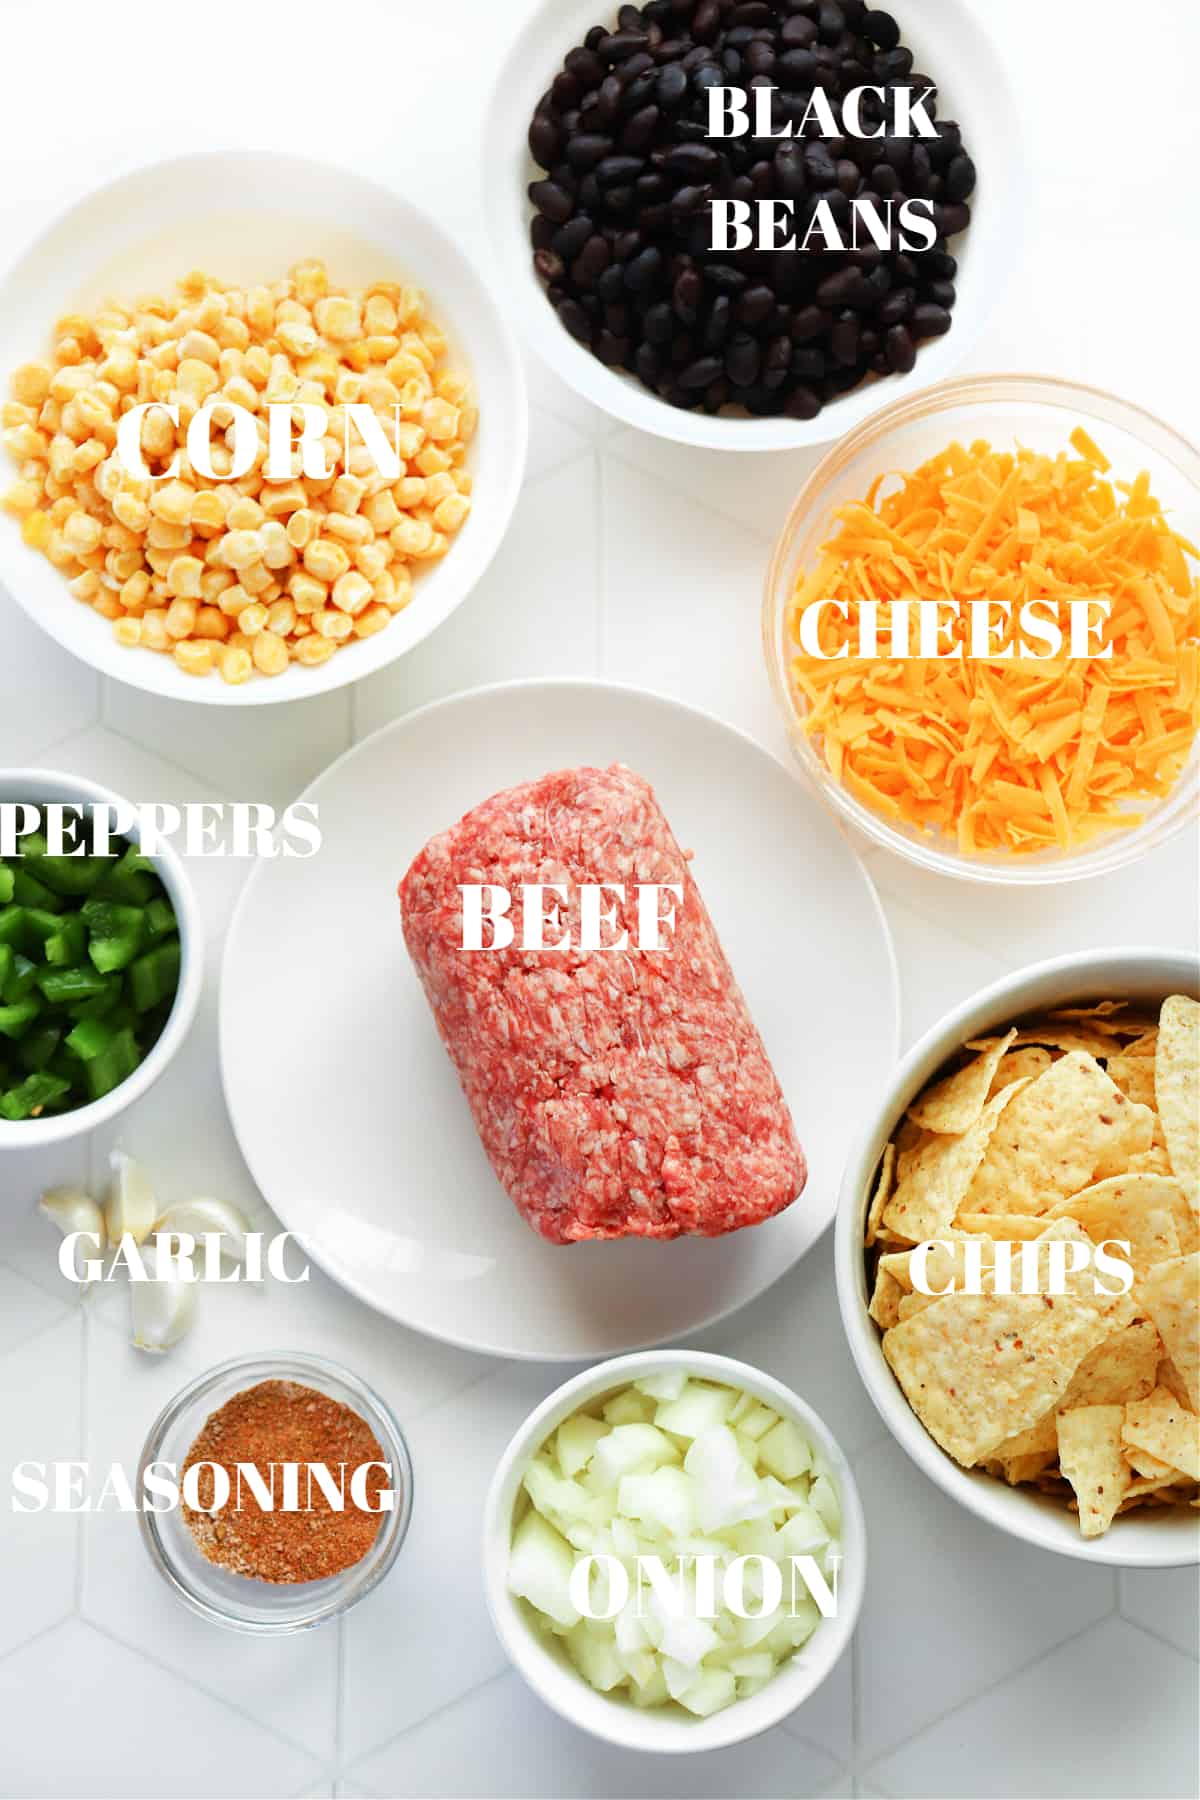 All ingredients for taco casserole on a white tile board.